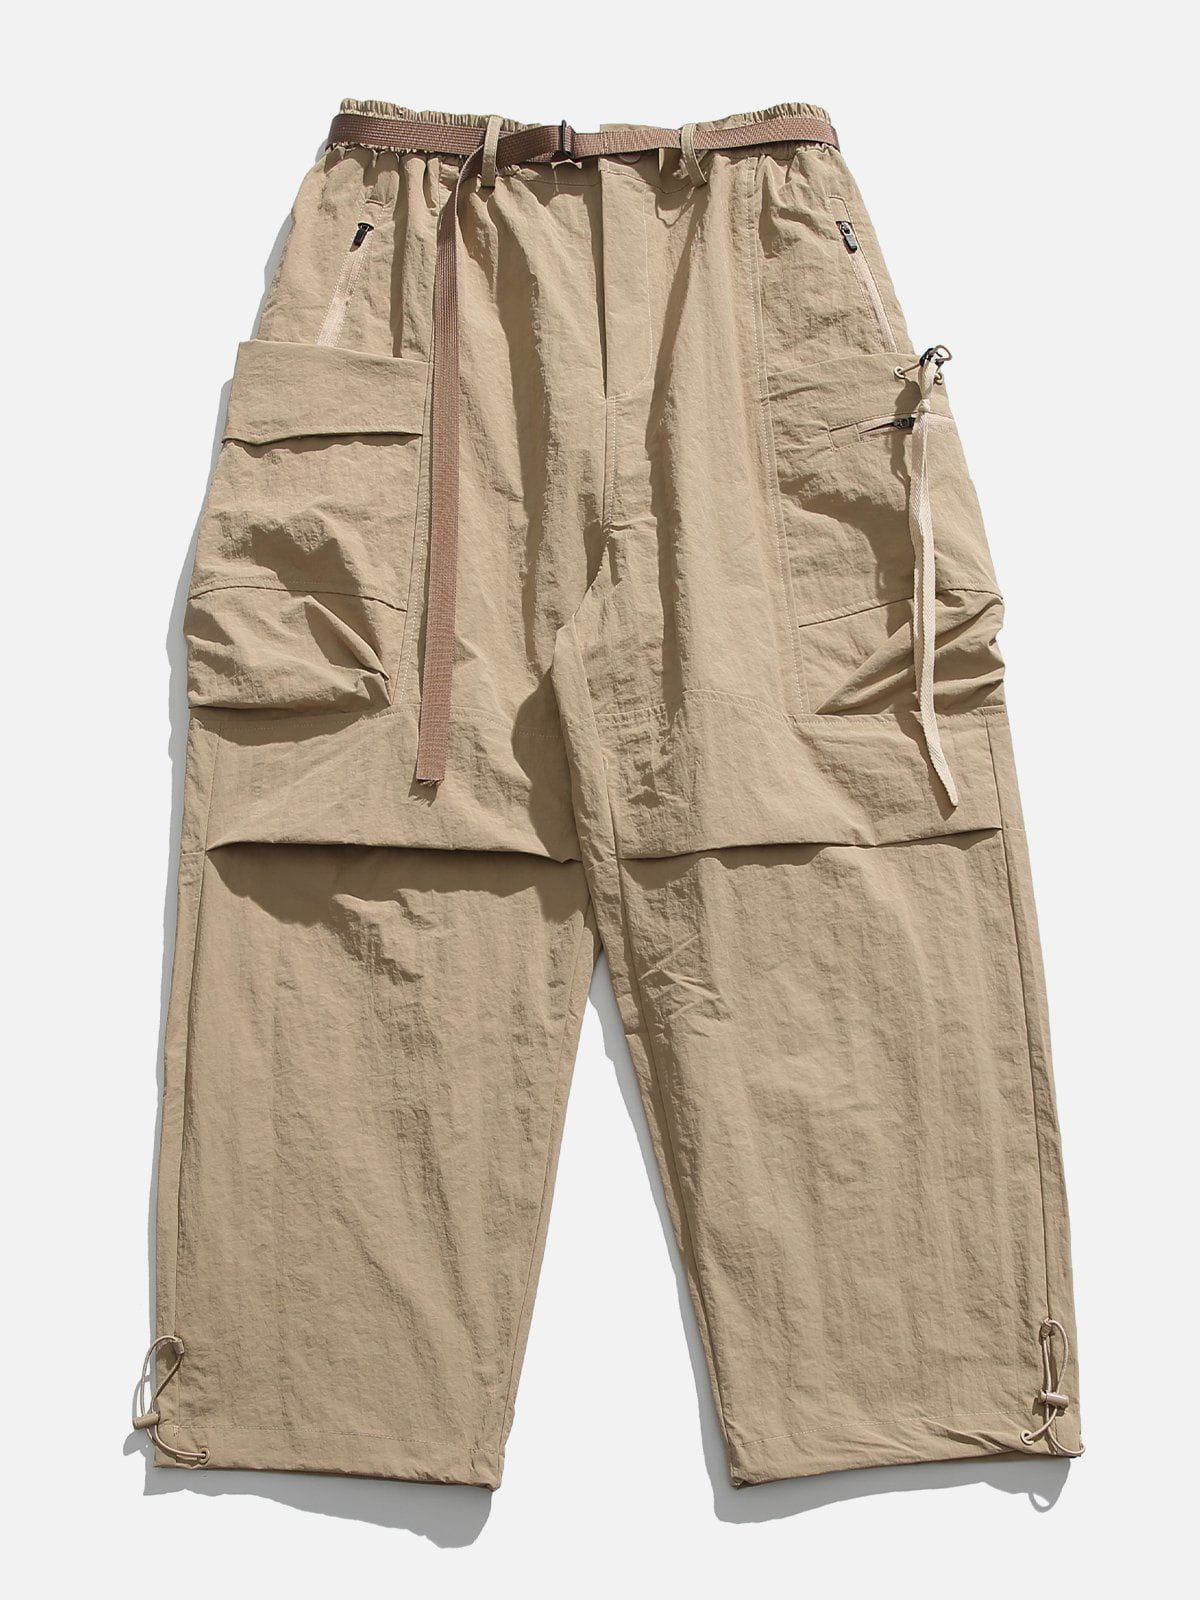 Sneakerland® - Large Pockets Pleated Cargo Pants